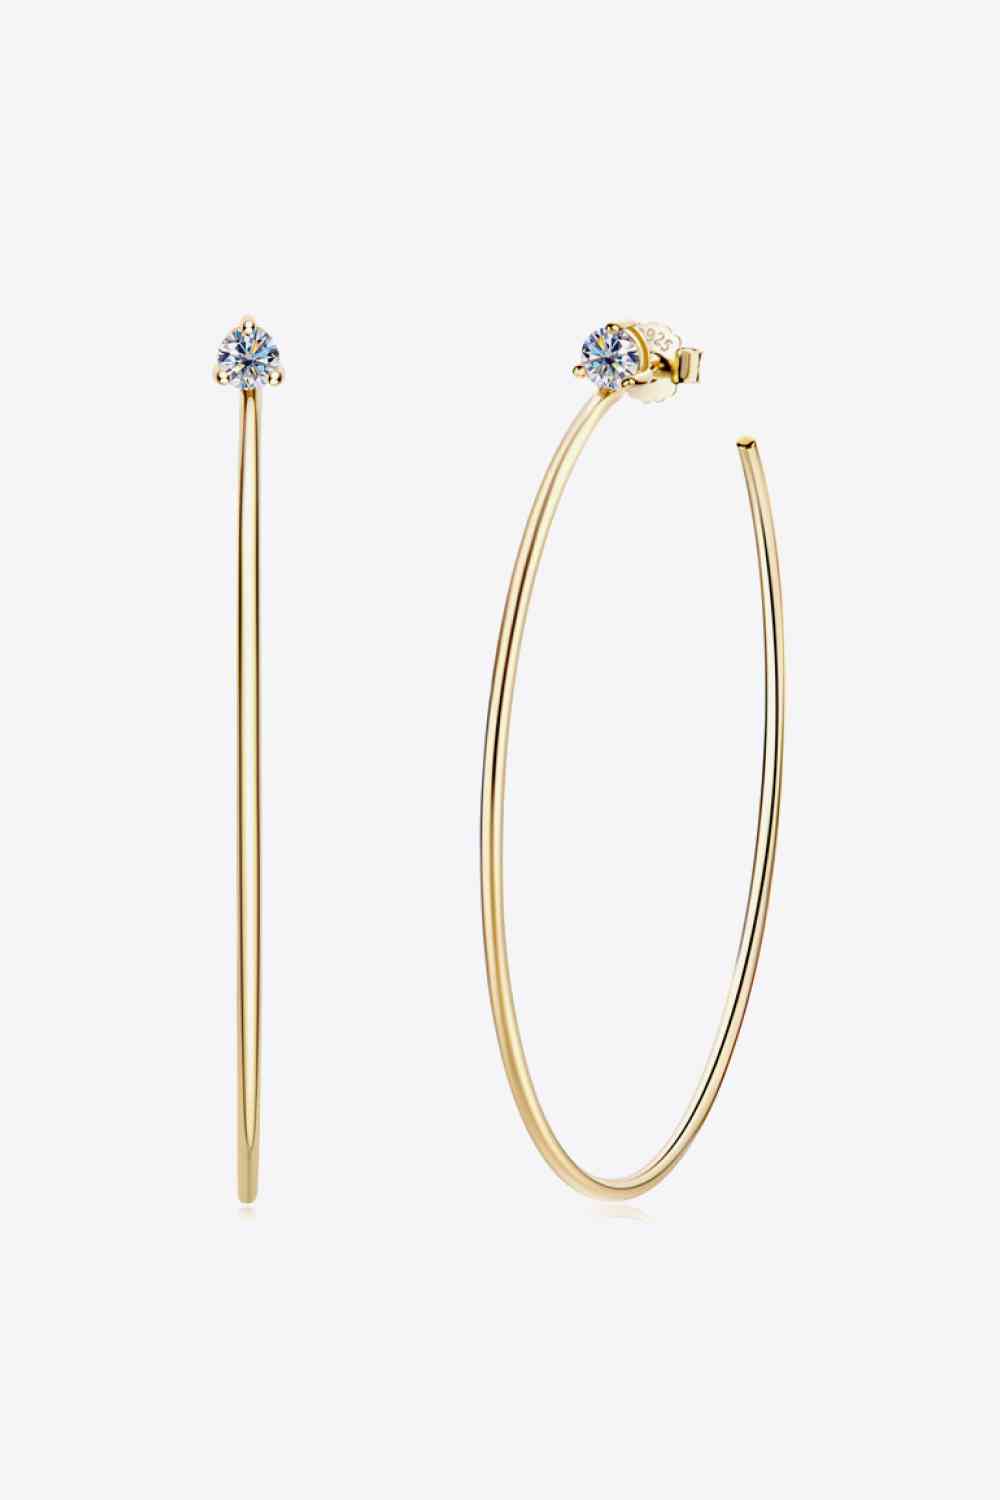 a pair of gold hoop earrings with a single diamond